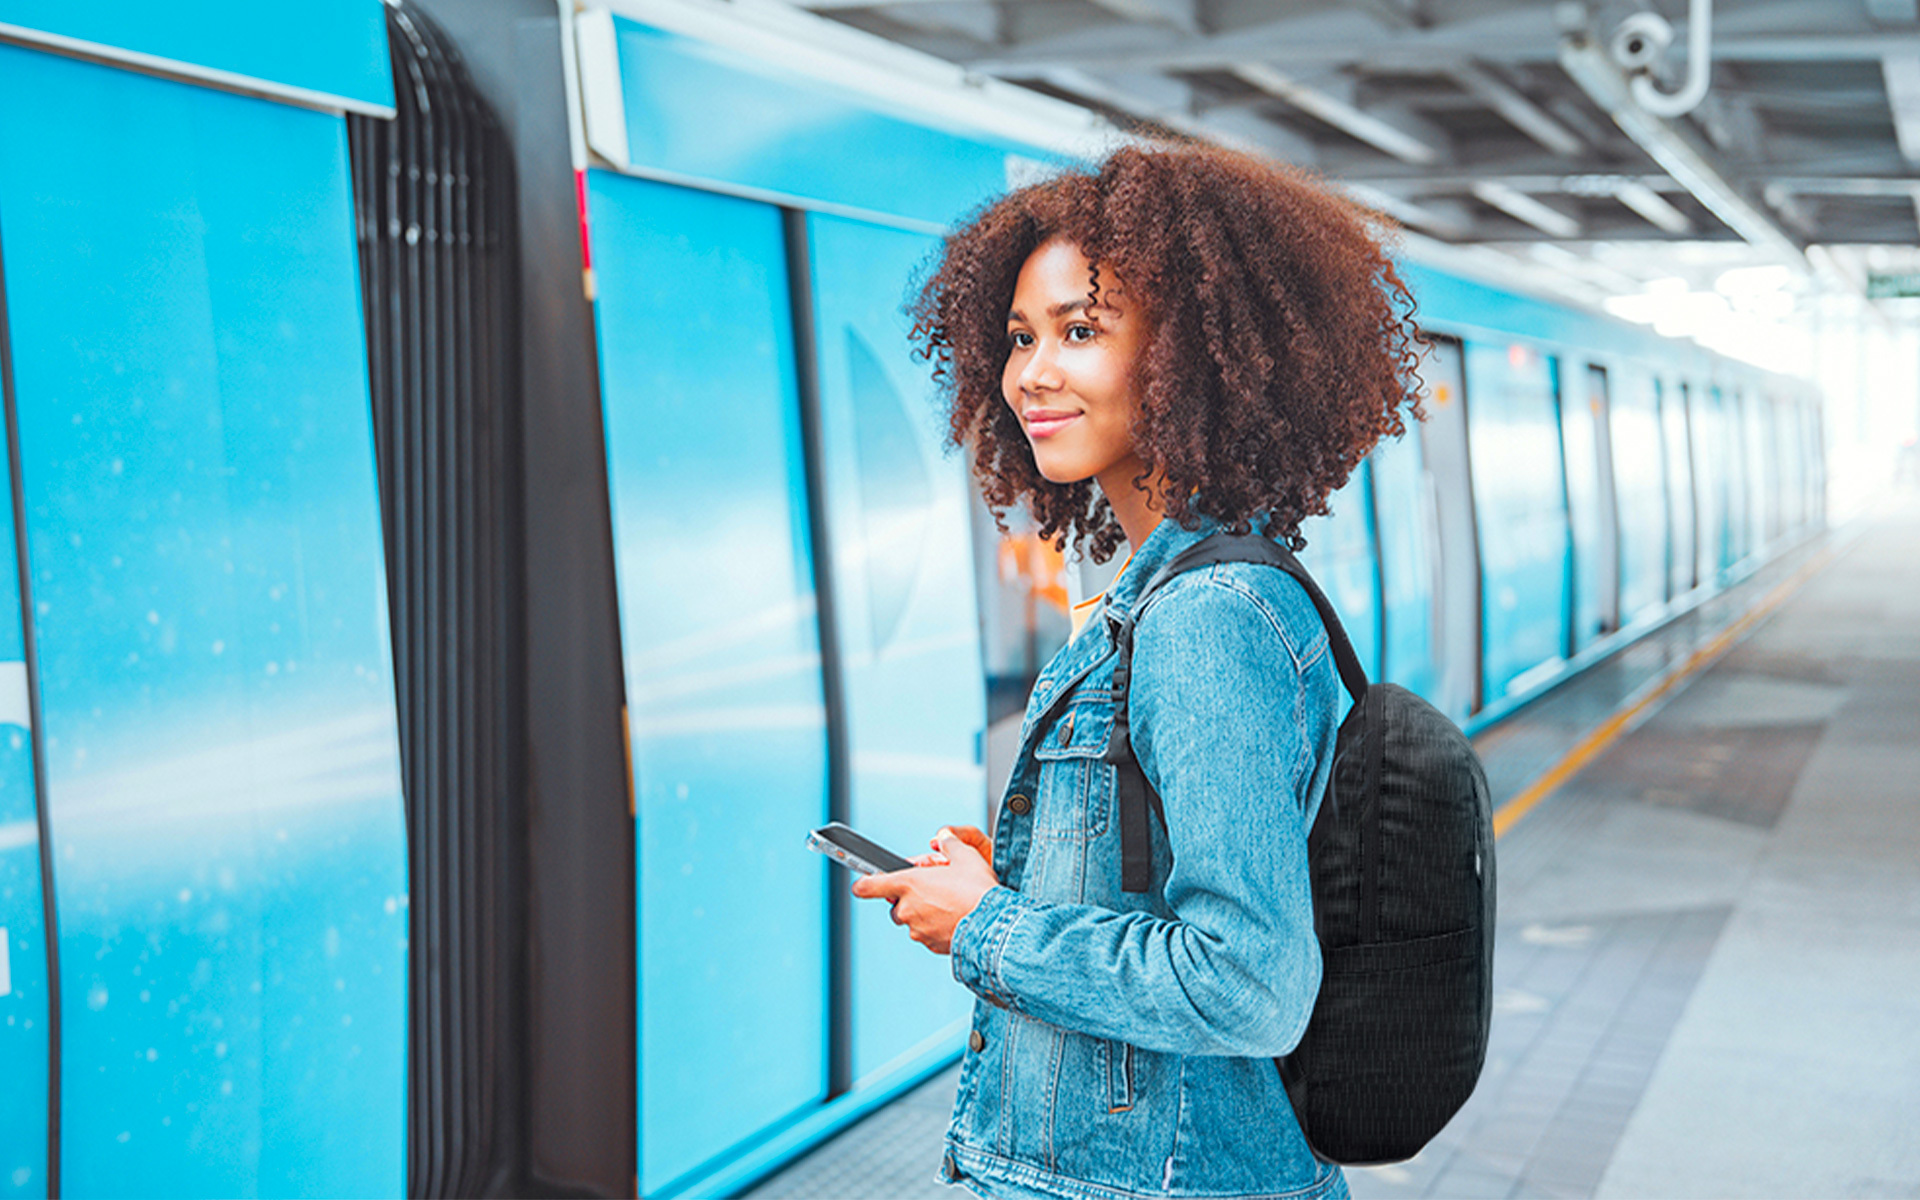 Young woman with Bagpack and smartphone, waiting to board train